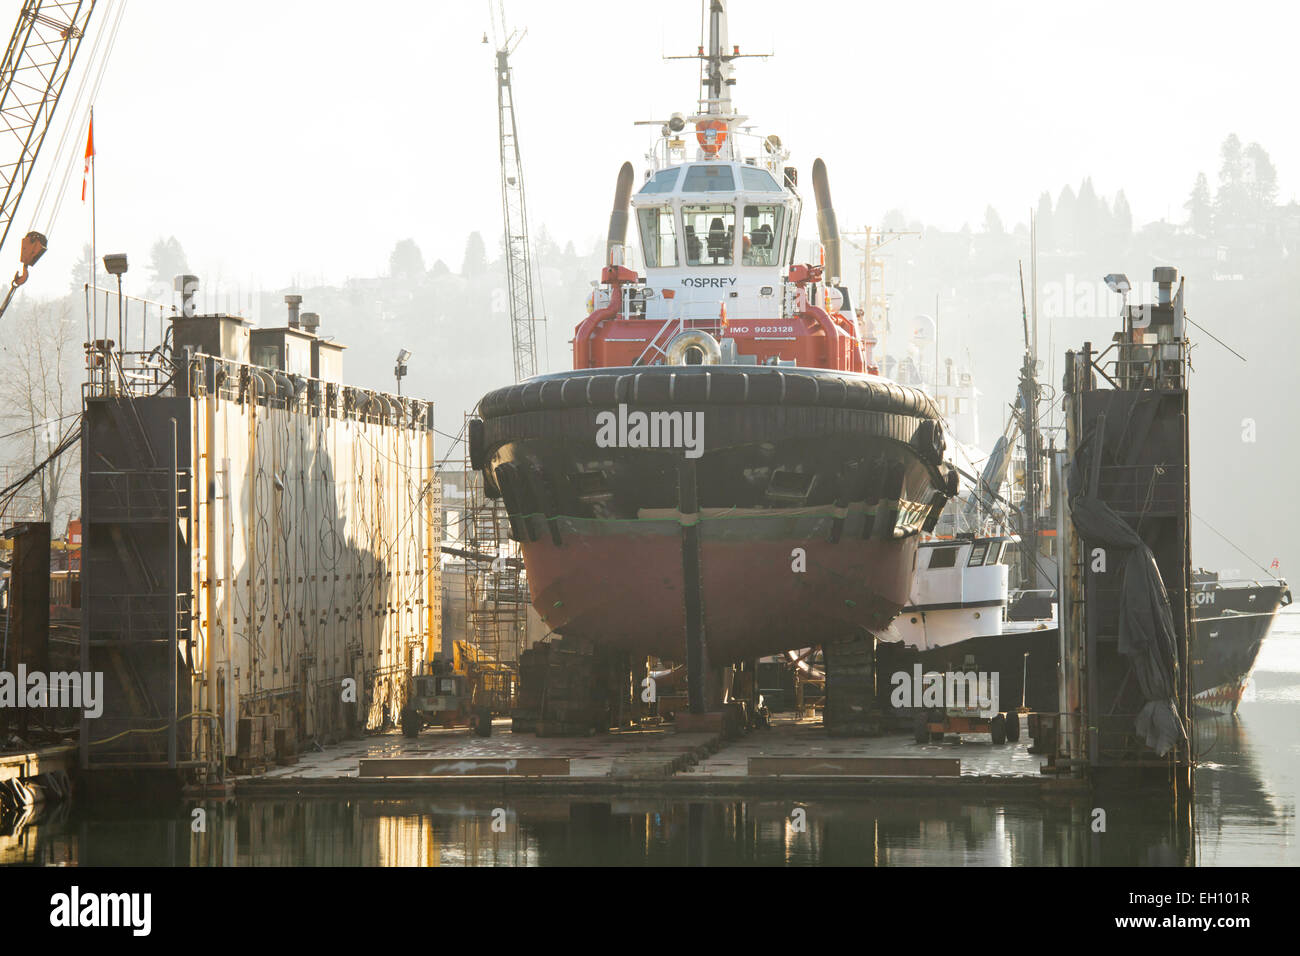 The Seaspan Osprey, a towing and escort tugboat in dry dock for maintenance at Allied Shipbuilders in Burrard Inlet, Vancouver Stock Photo